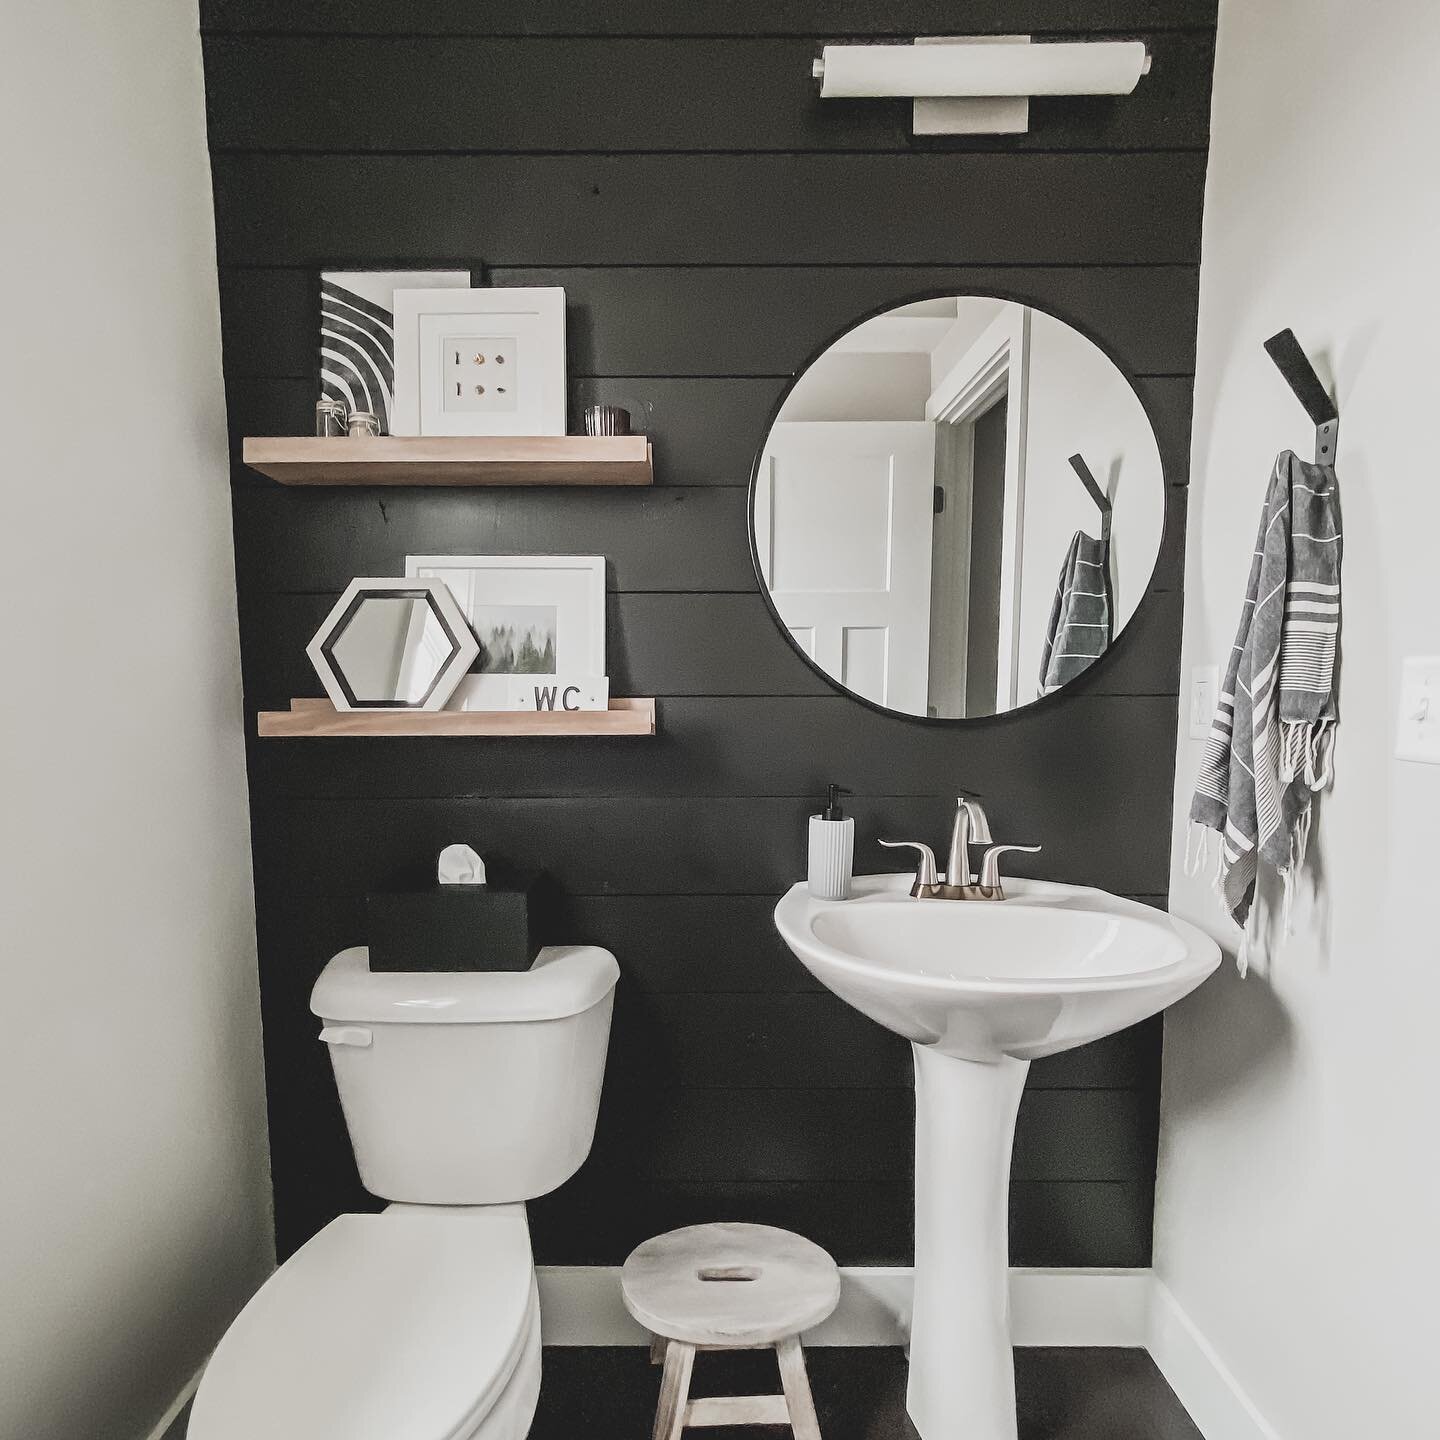 Powder room makeover phase 1 is done! The space wasn't bad before but I love that it has so much character now.⁠⁣
⁠⁣
To minimize costs on this project I mixed paint I had on hand, built my own shelves, and spray-painted a mirror I found at @homegoods